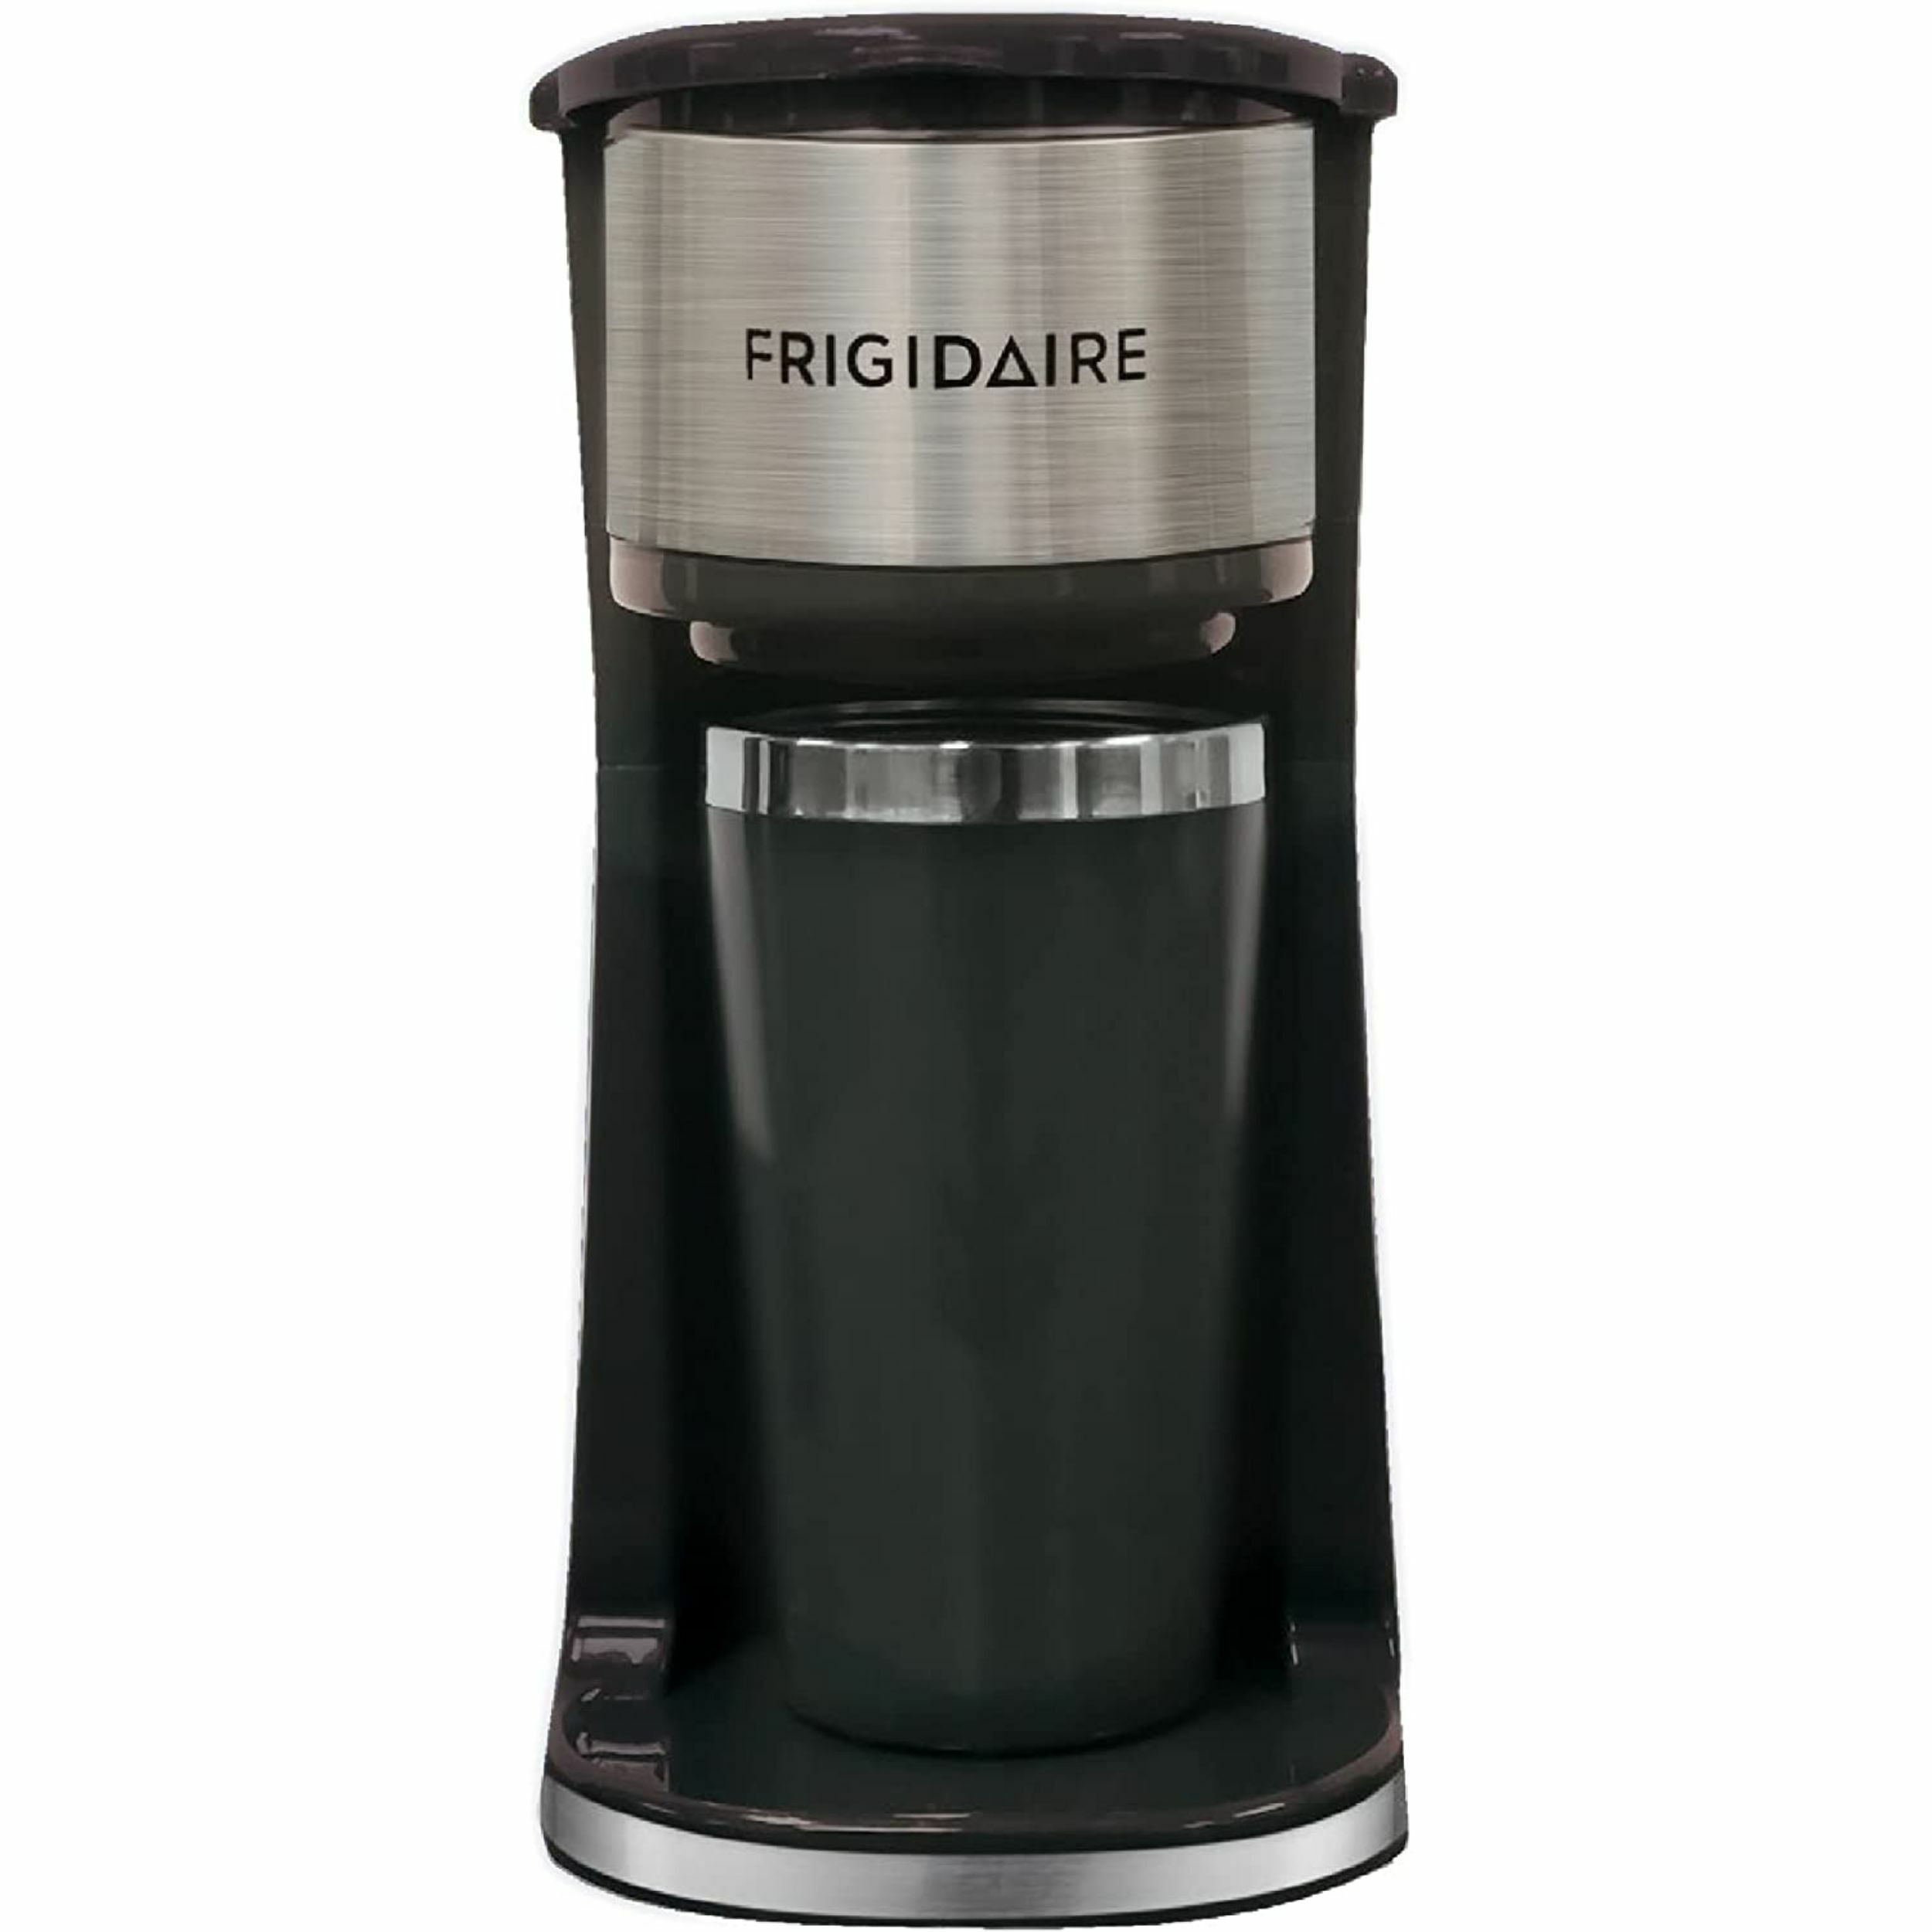 Frigidaire Ecmk110 Stainless Steel 2 in 1 Single Serve K Cup / Ground Coffee Maker, 14oz with Push Button Switch, with Mesh Filter, White